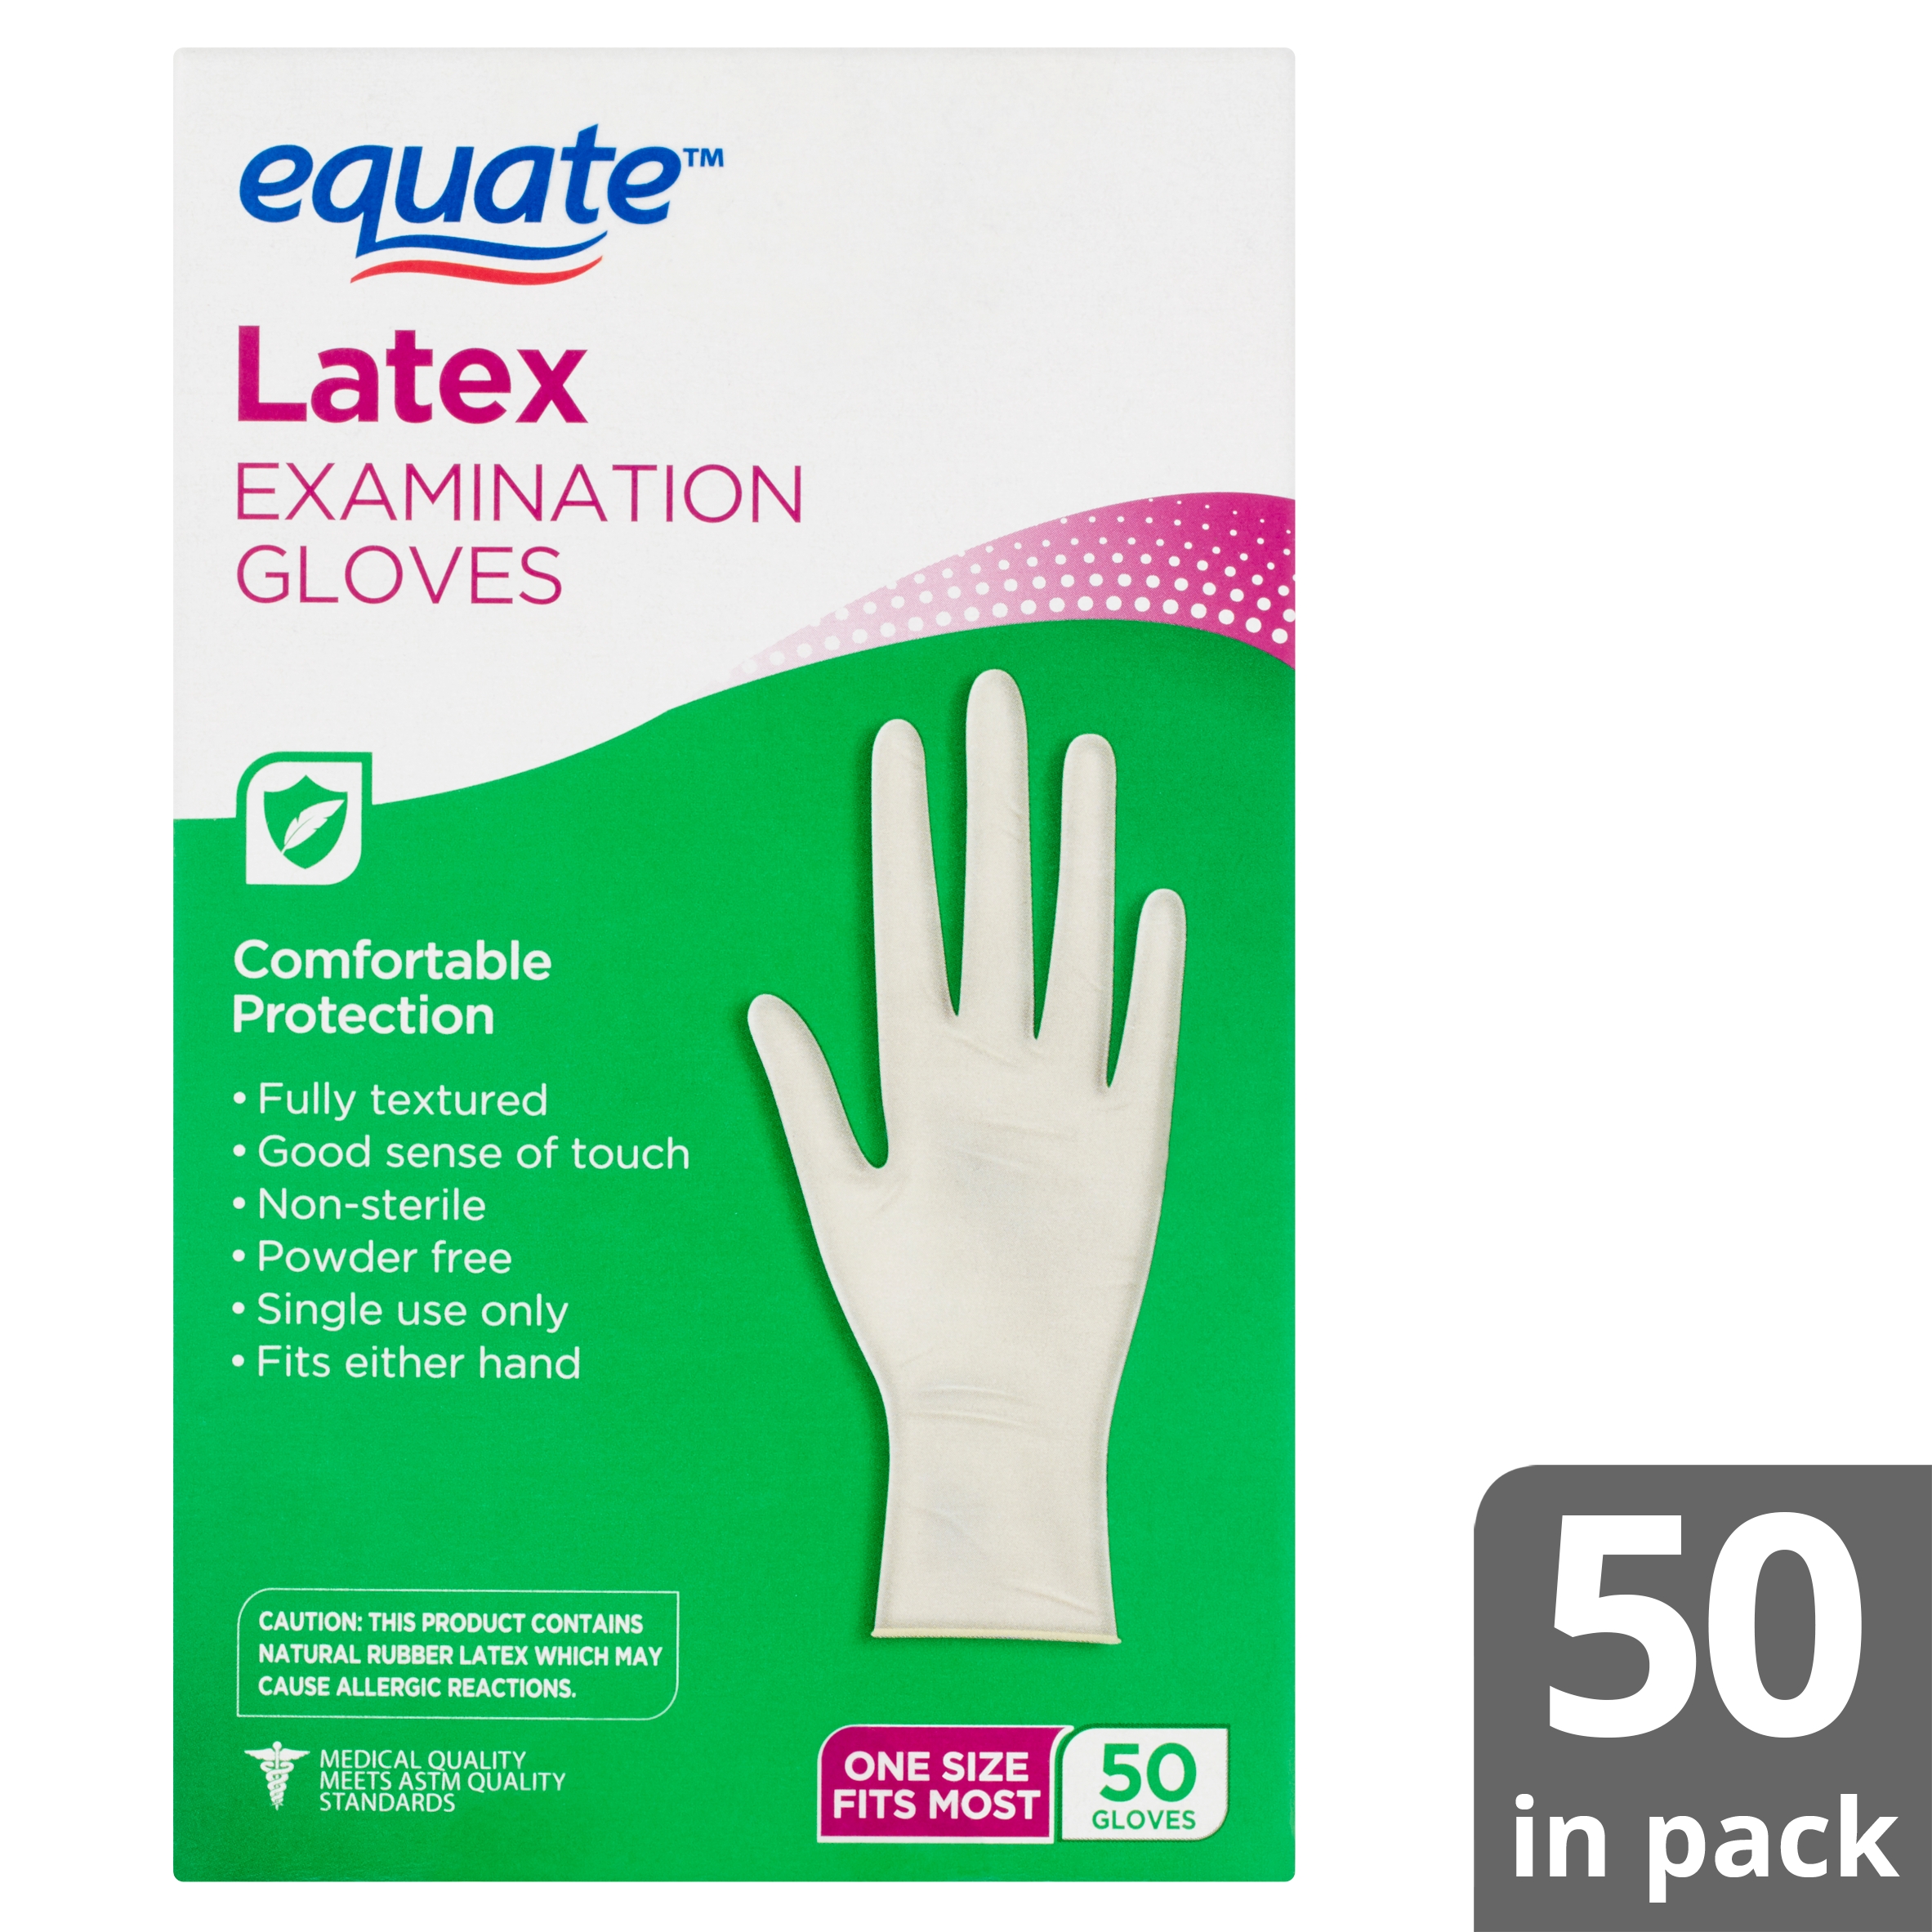 Equate Latex Examination Gloves, 50 Count - image 10 of 10